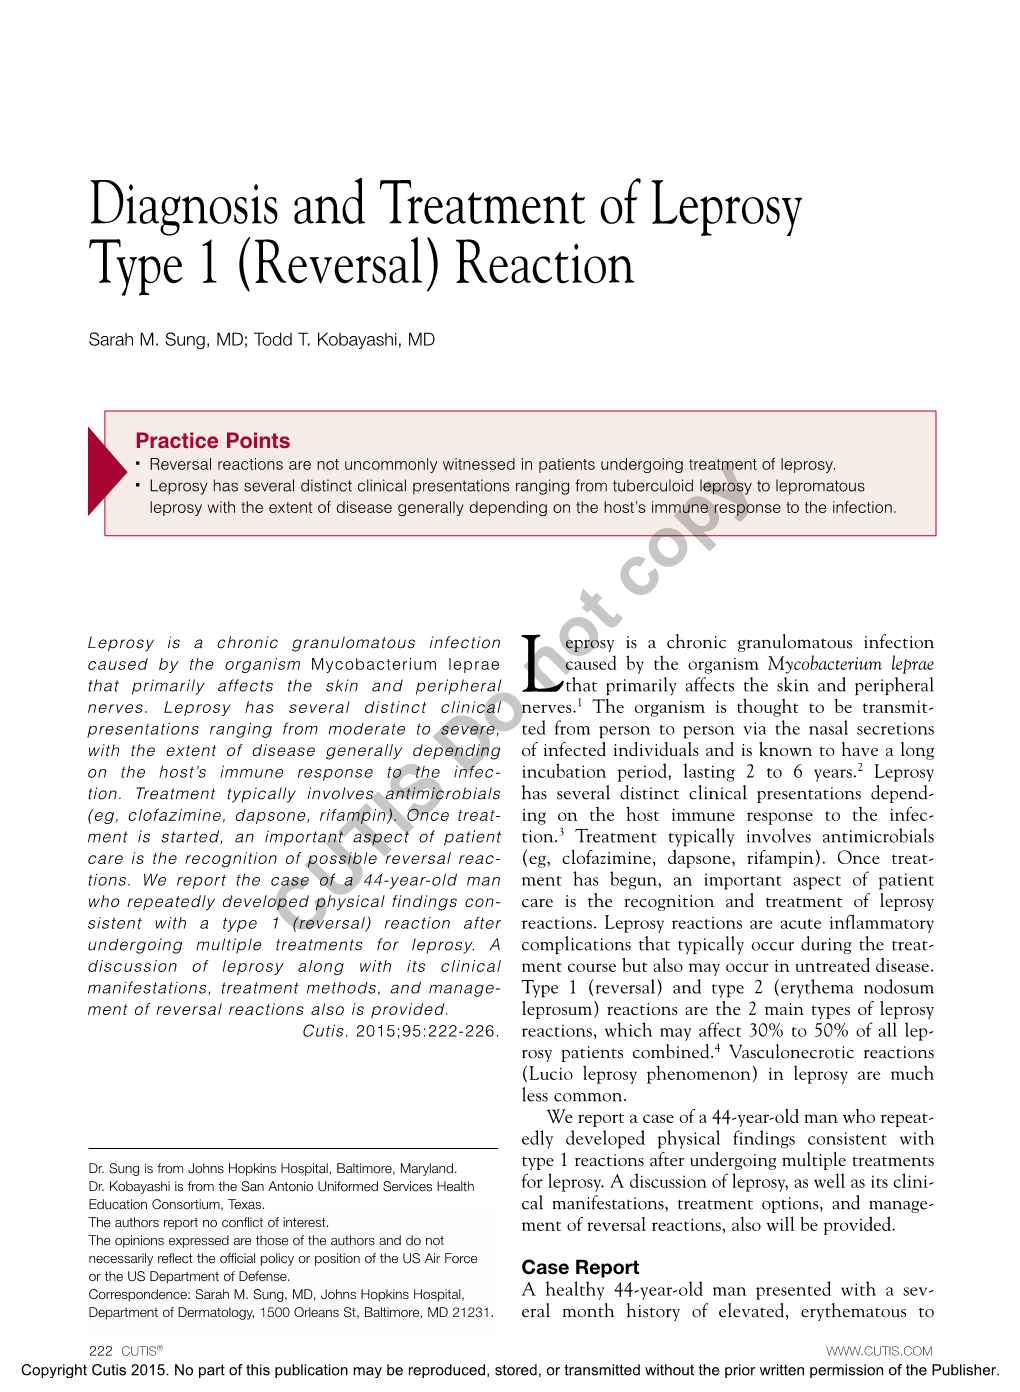 Diagnosis and Treatment of Leprosy Type 1 (Reversal) Reaction